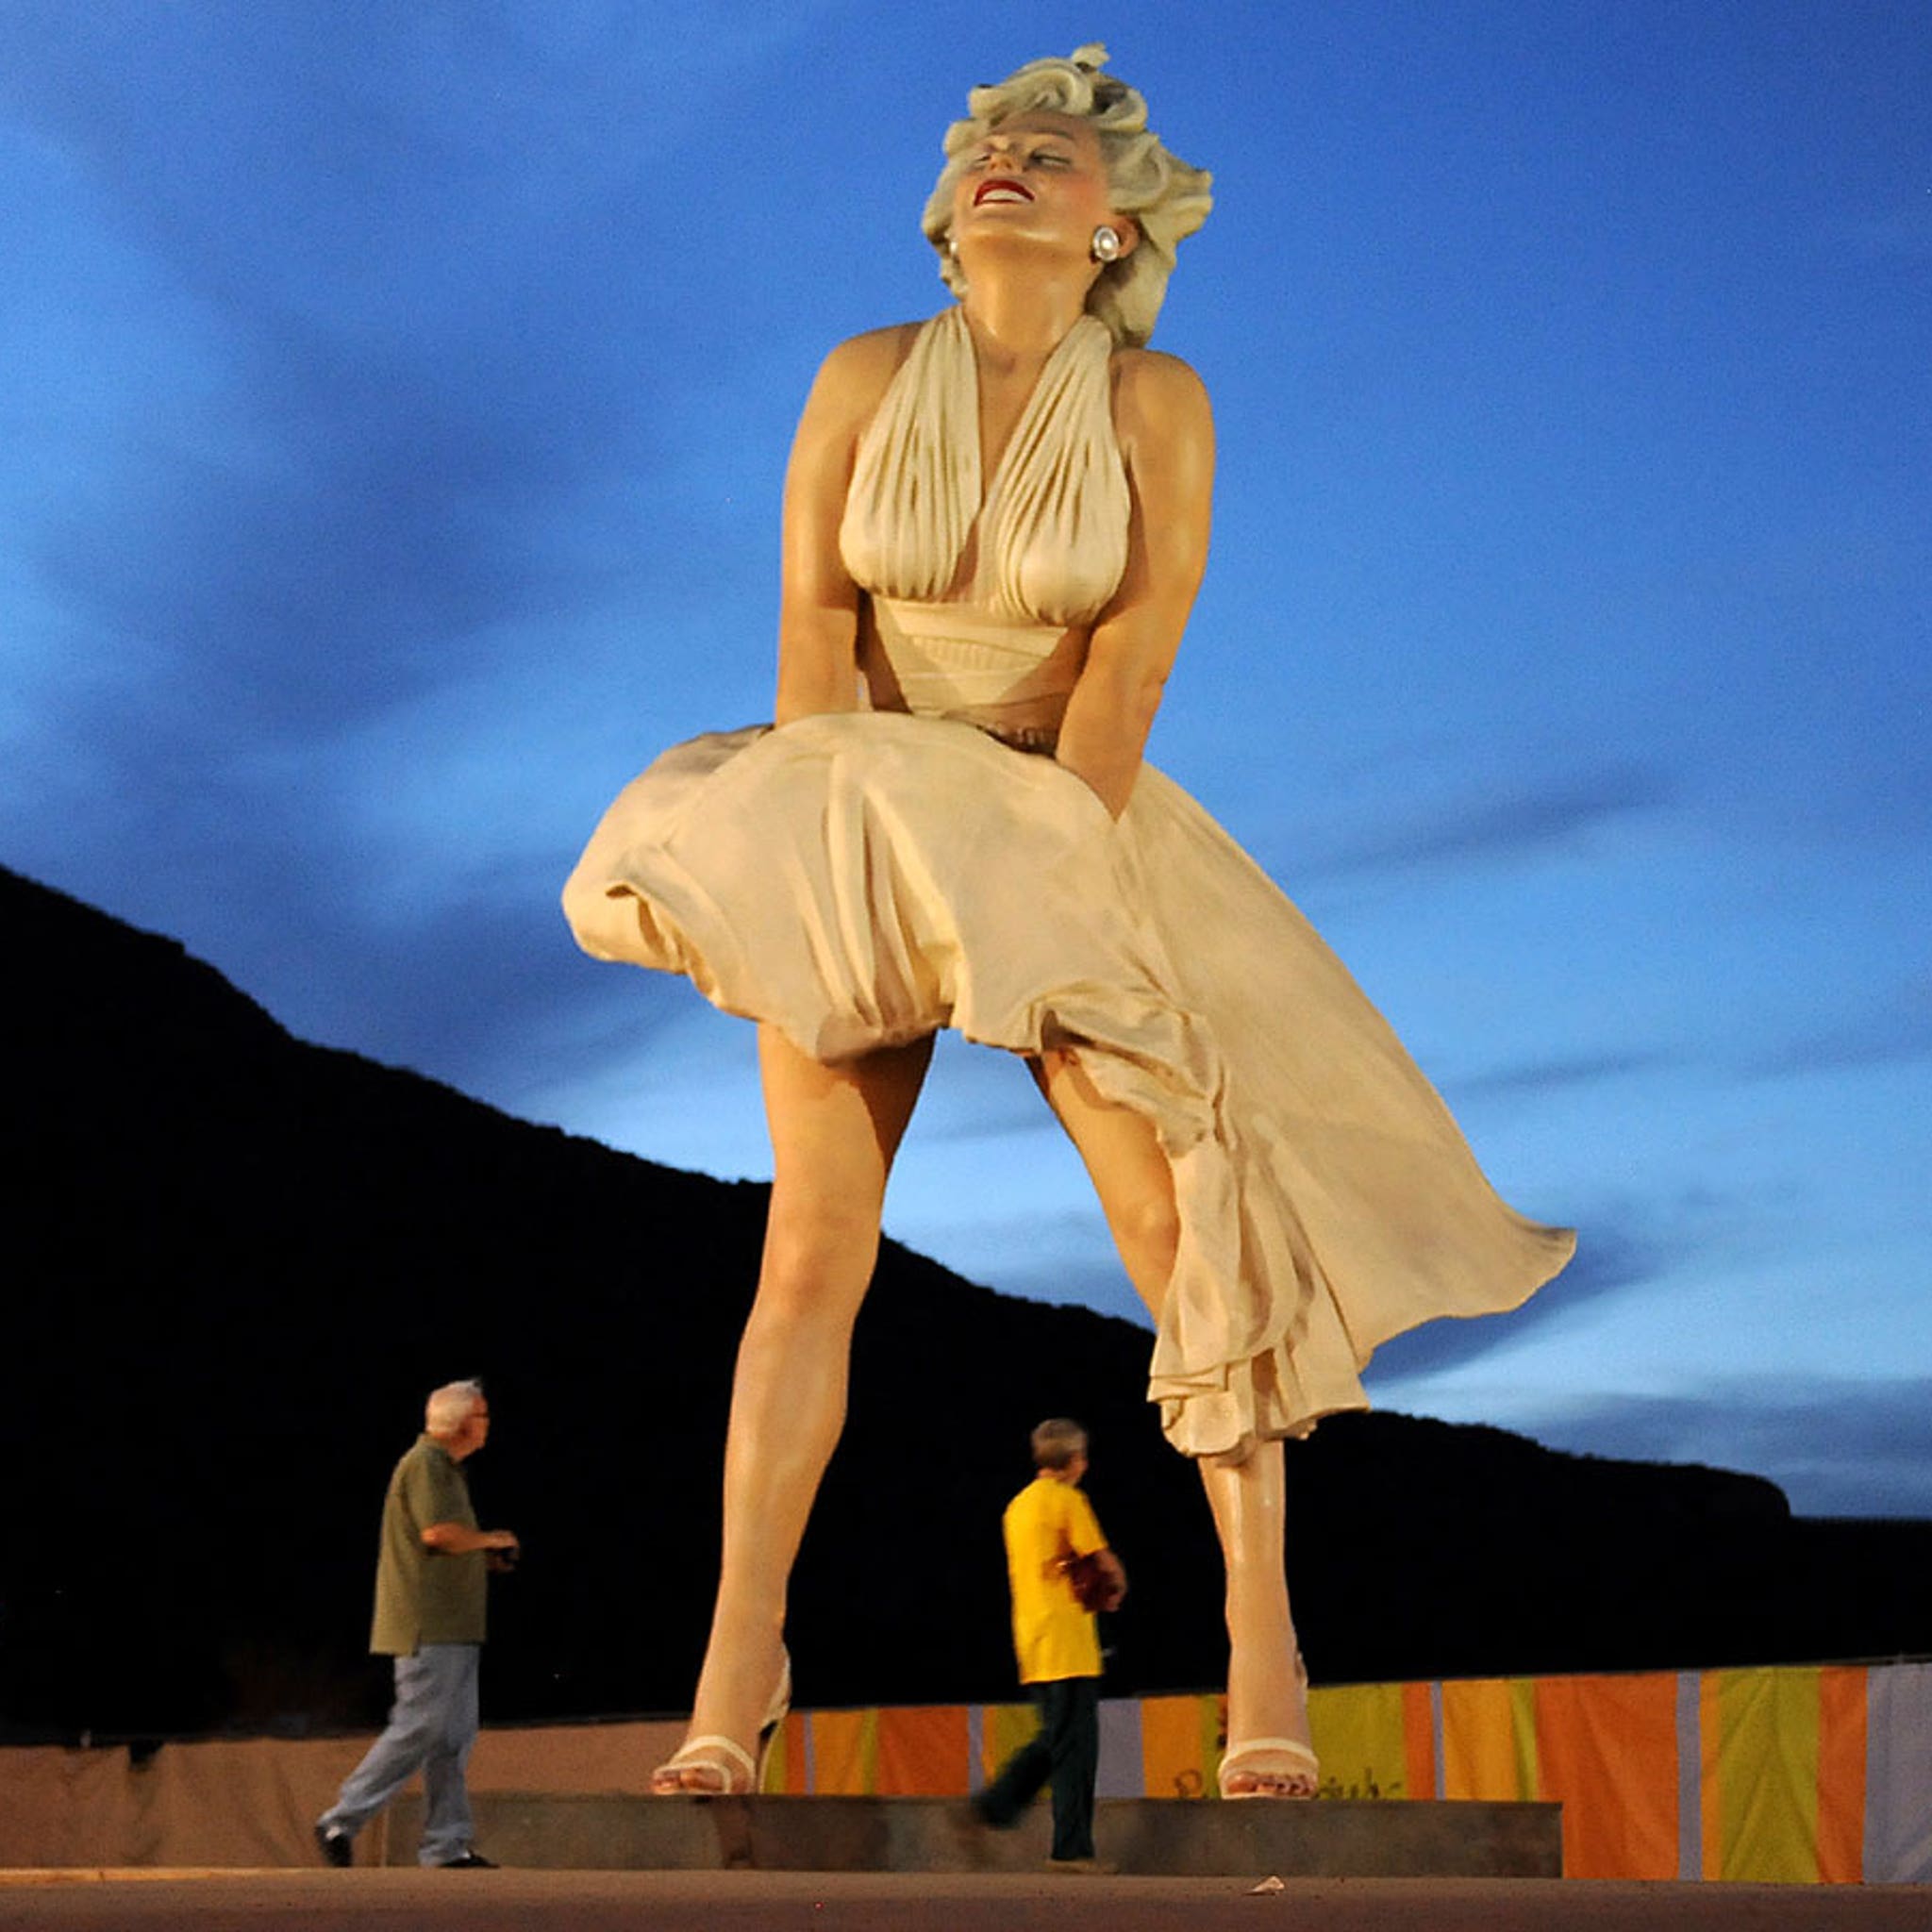 Palm Springs Celebrates Its Biggest Tribute to Marilyn Monroe Ever - LAST  ONE ON THE BUS